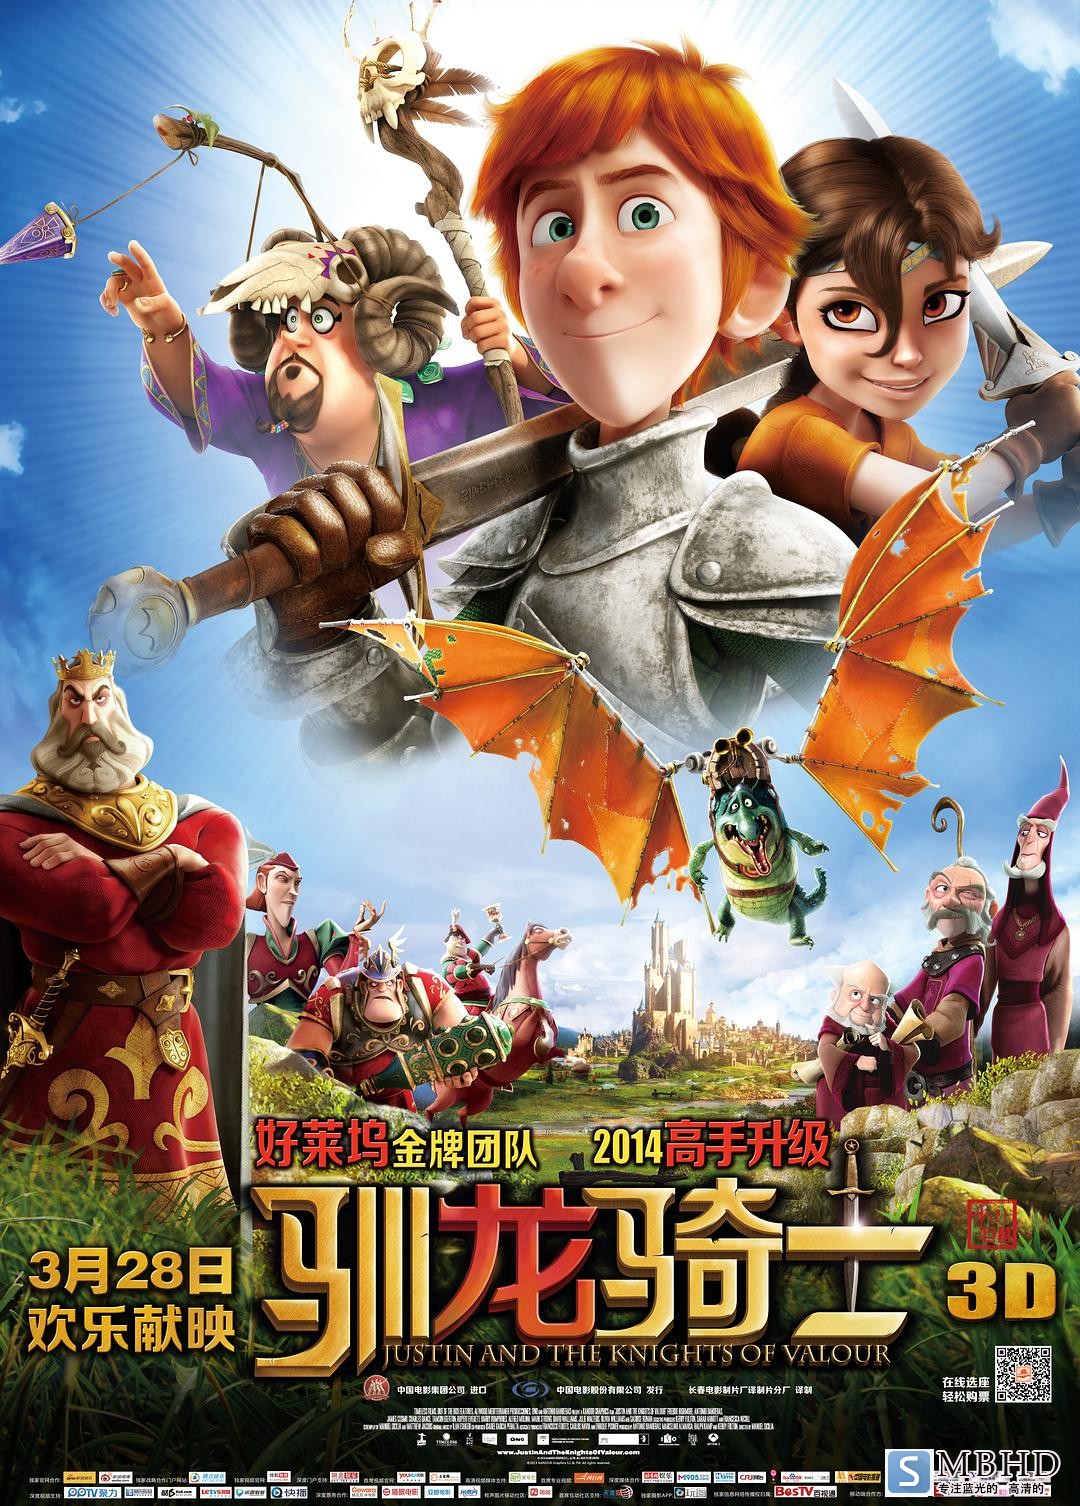 ѱʿ Justin.and.the.Knights.of.Valour.2013.1080p.BluRay.x264-RUSTED 6.56GB-2.jpg